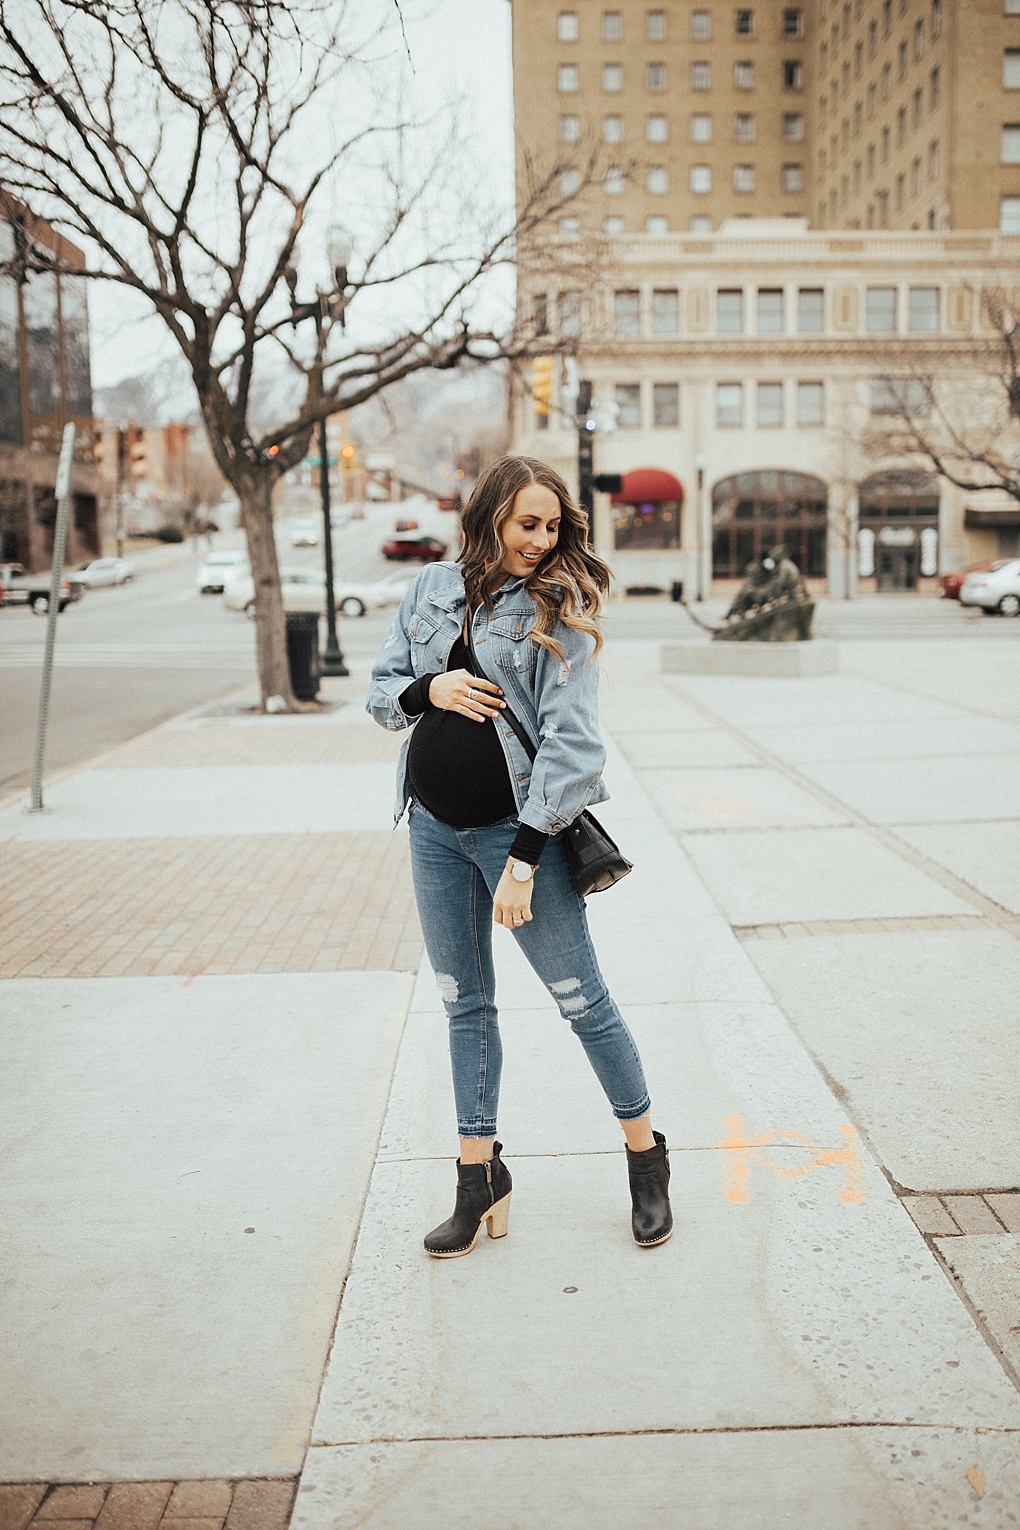 SAVE this ASAP for the perfect tips on how to master the oversized jacket trend this spring thanks to Utah Style Blogger Dani Marie!